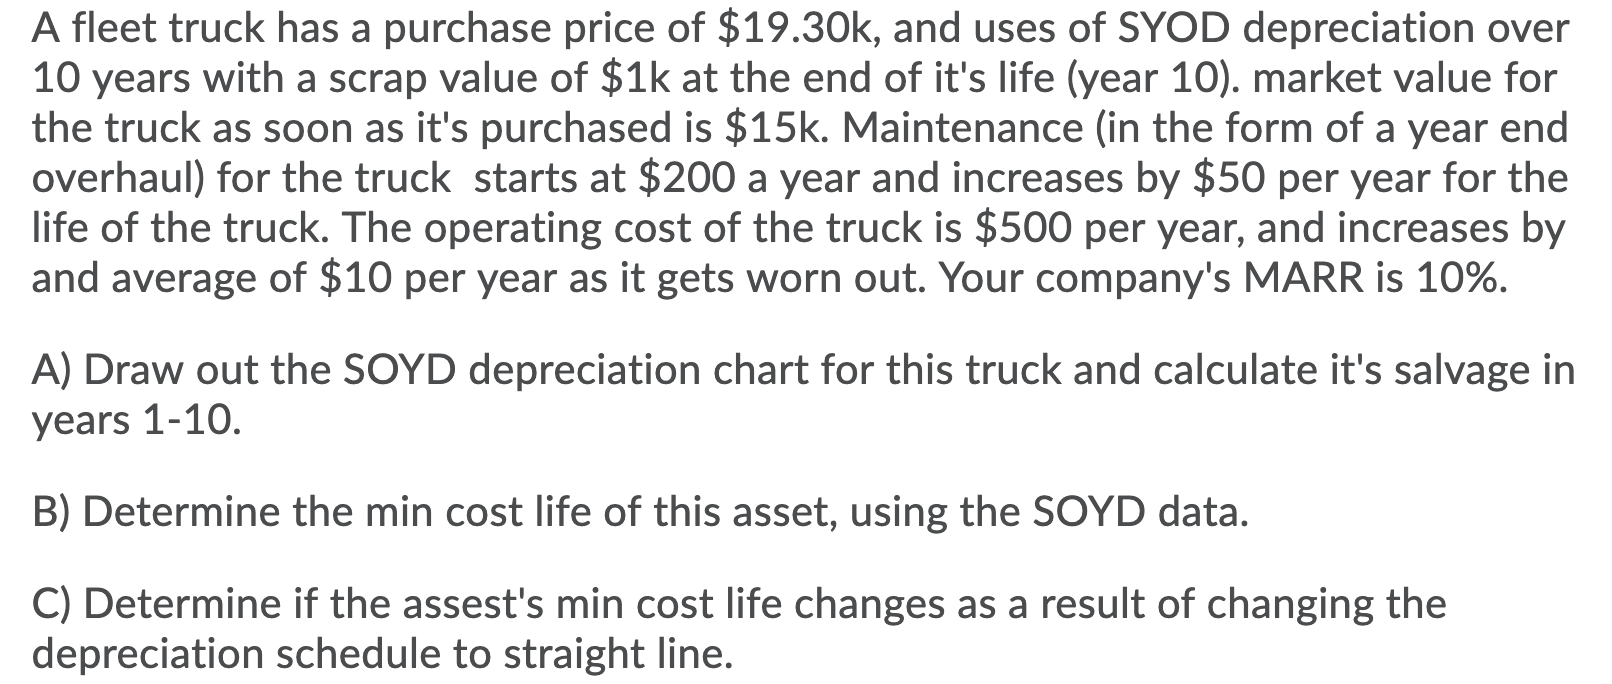 A fleet truck has a purchase price of $19.30k, and uses of SYOD depreciation over
10 years with a scrap value of $1k at the e